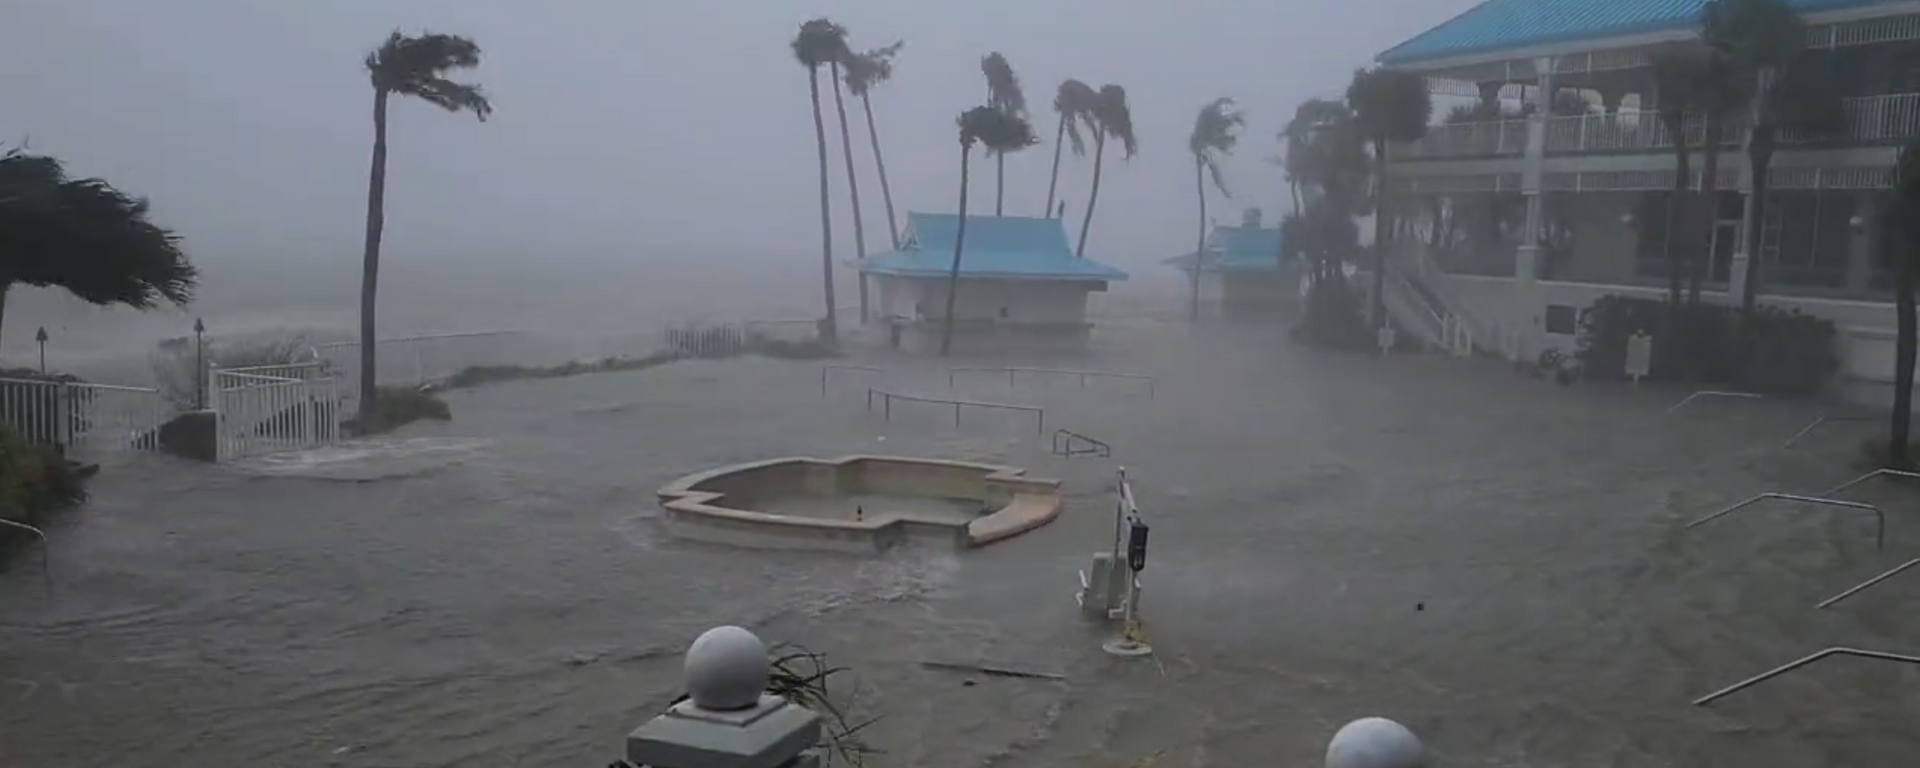 Hurricane Ian has officially made landfall in Florida as a Category 4 storm, the US National Hurricane Center has confirmed. - Sputnik International, 1920, 28.09.2022